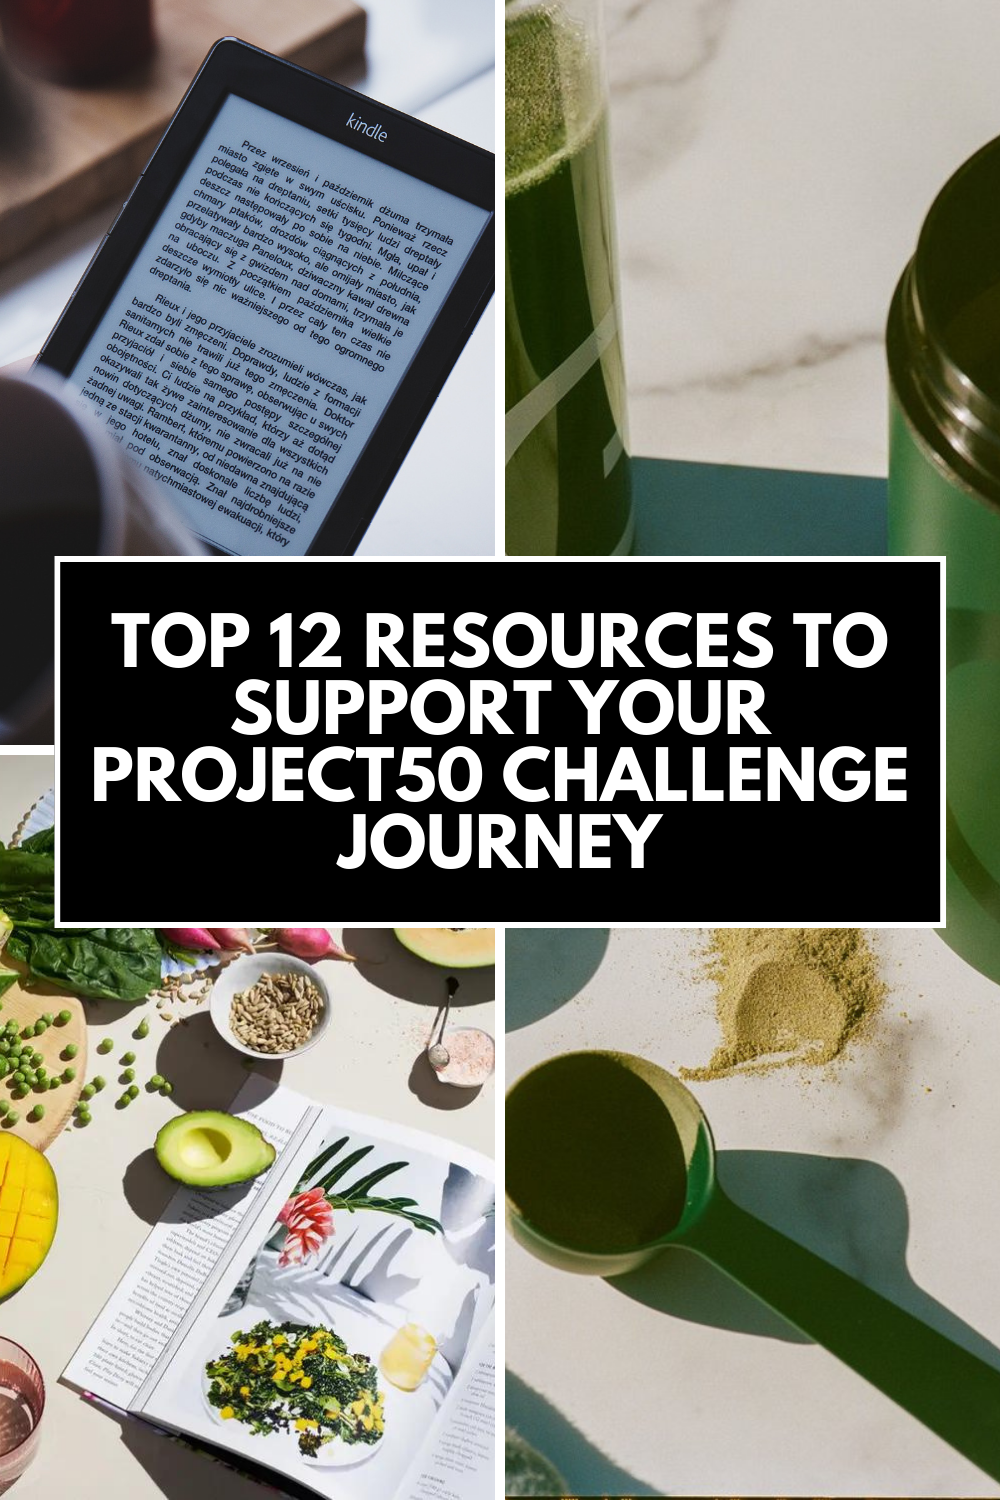 Top 12 Resources to Support Your Project50 Challenge Journey.png